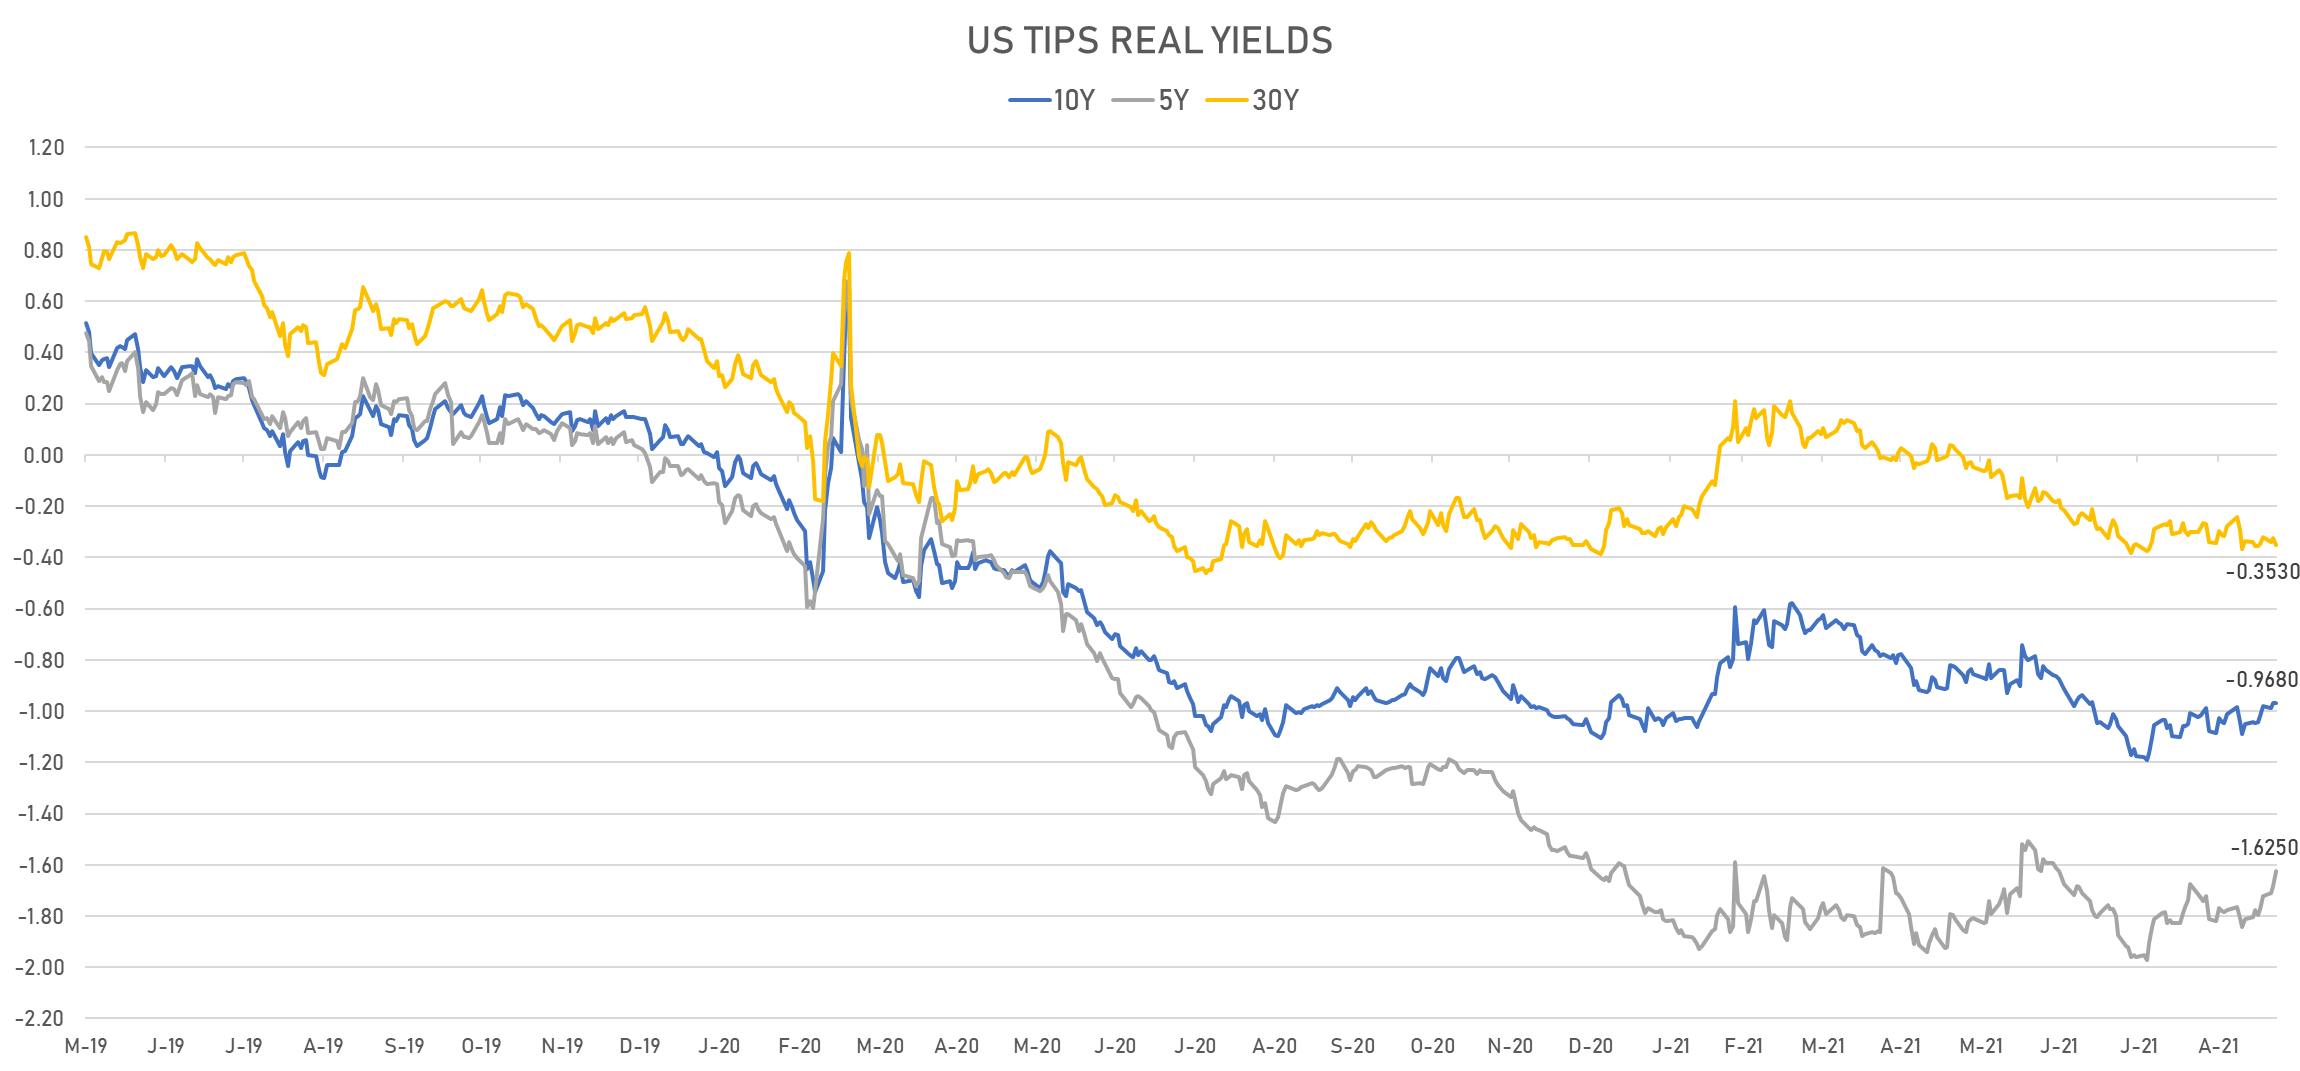 US TIPS Real Yields | Sources: phipost.com, Refinitiv data